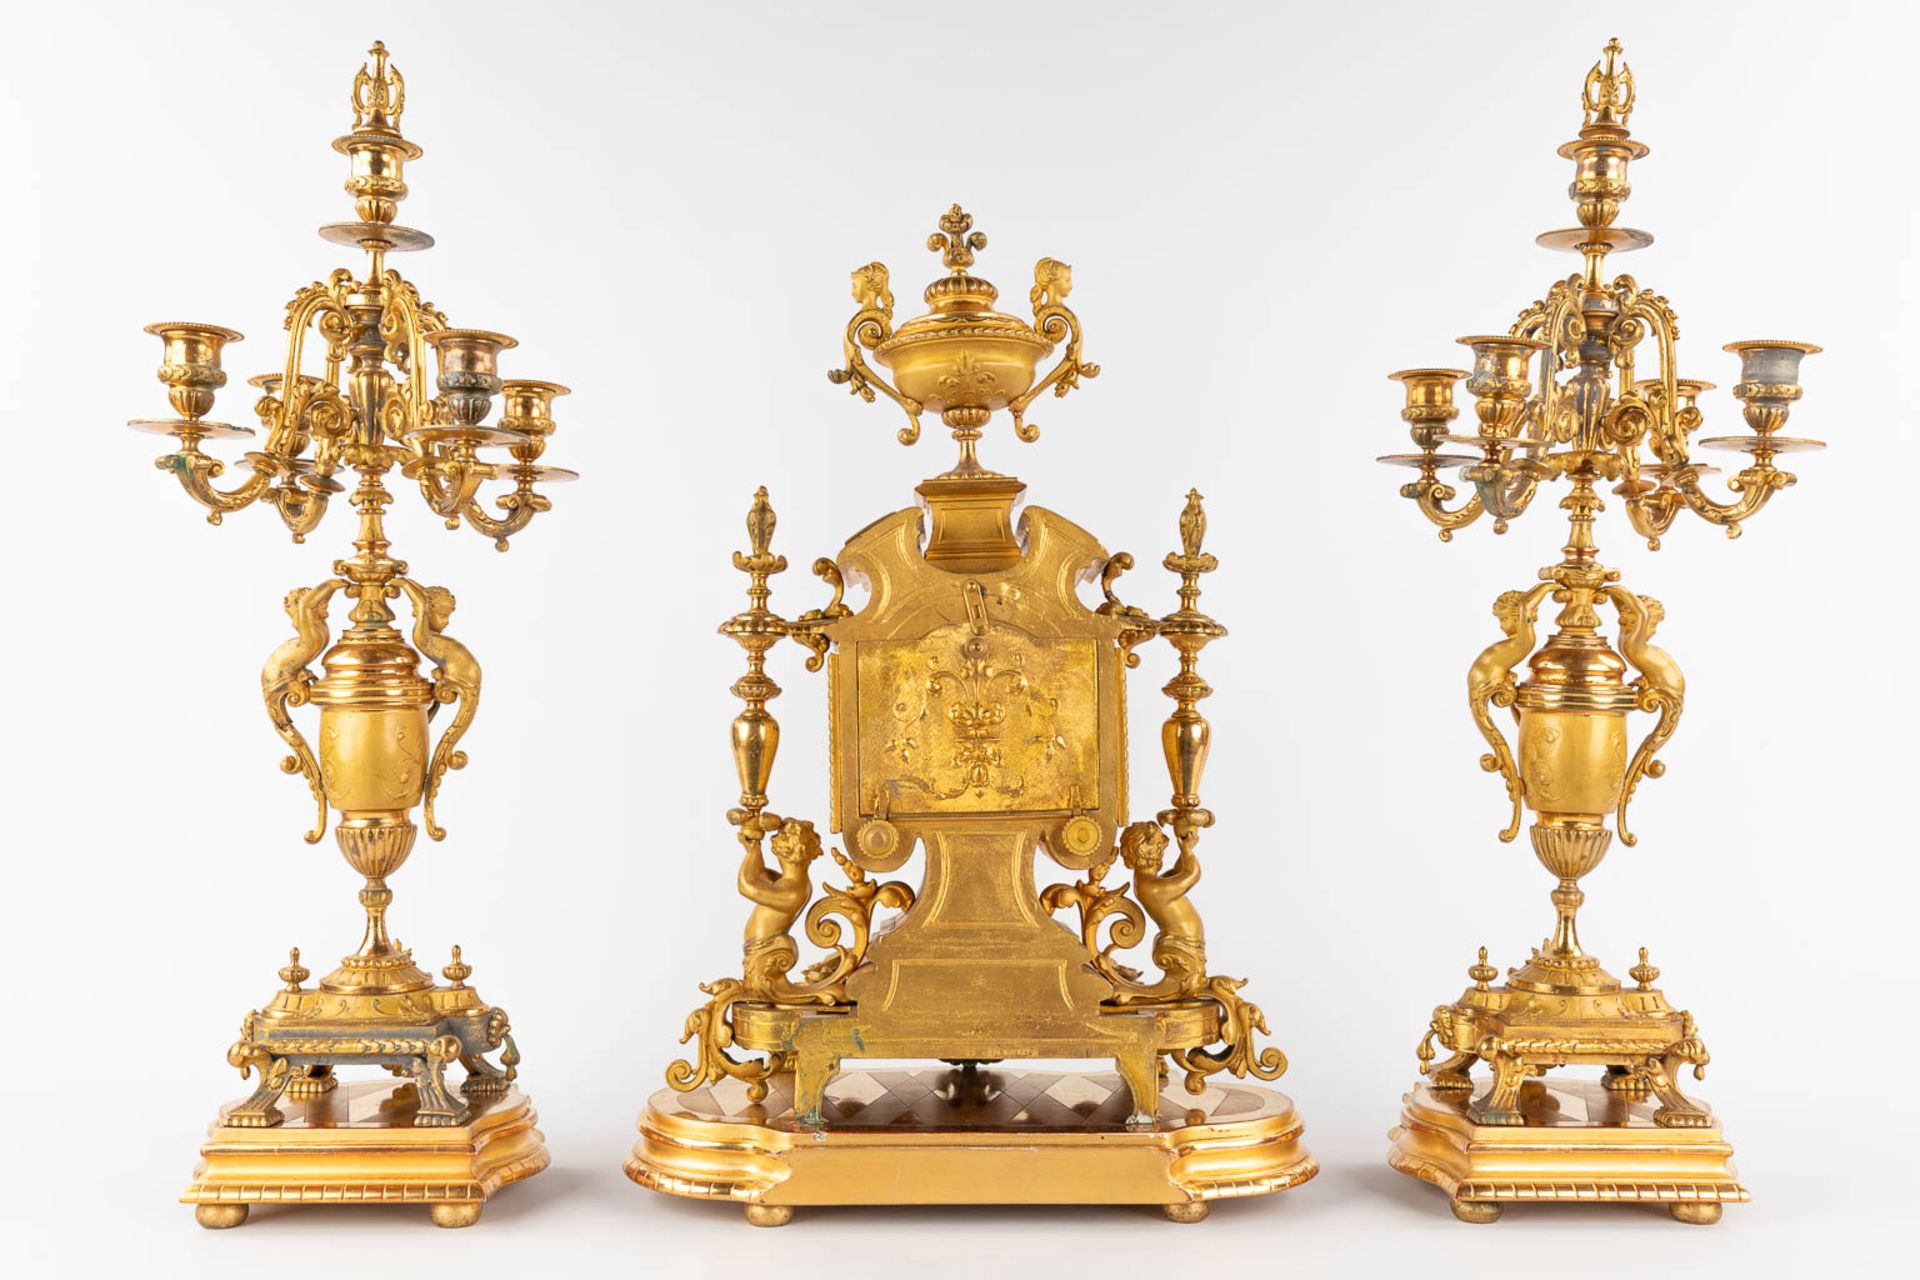 A three-piece mantle garniture clock and candelabra, gilt spelter, decorated with putti. Circa 1900. - Image 5 of 19